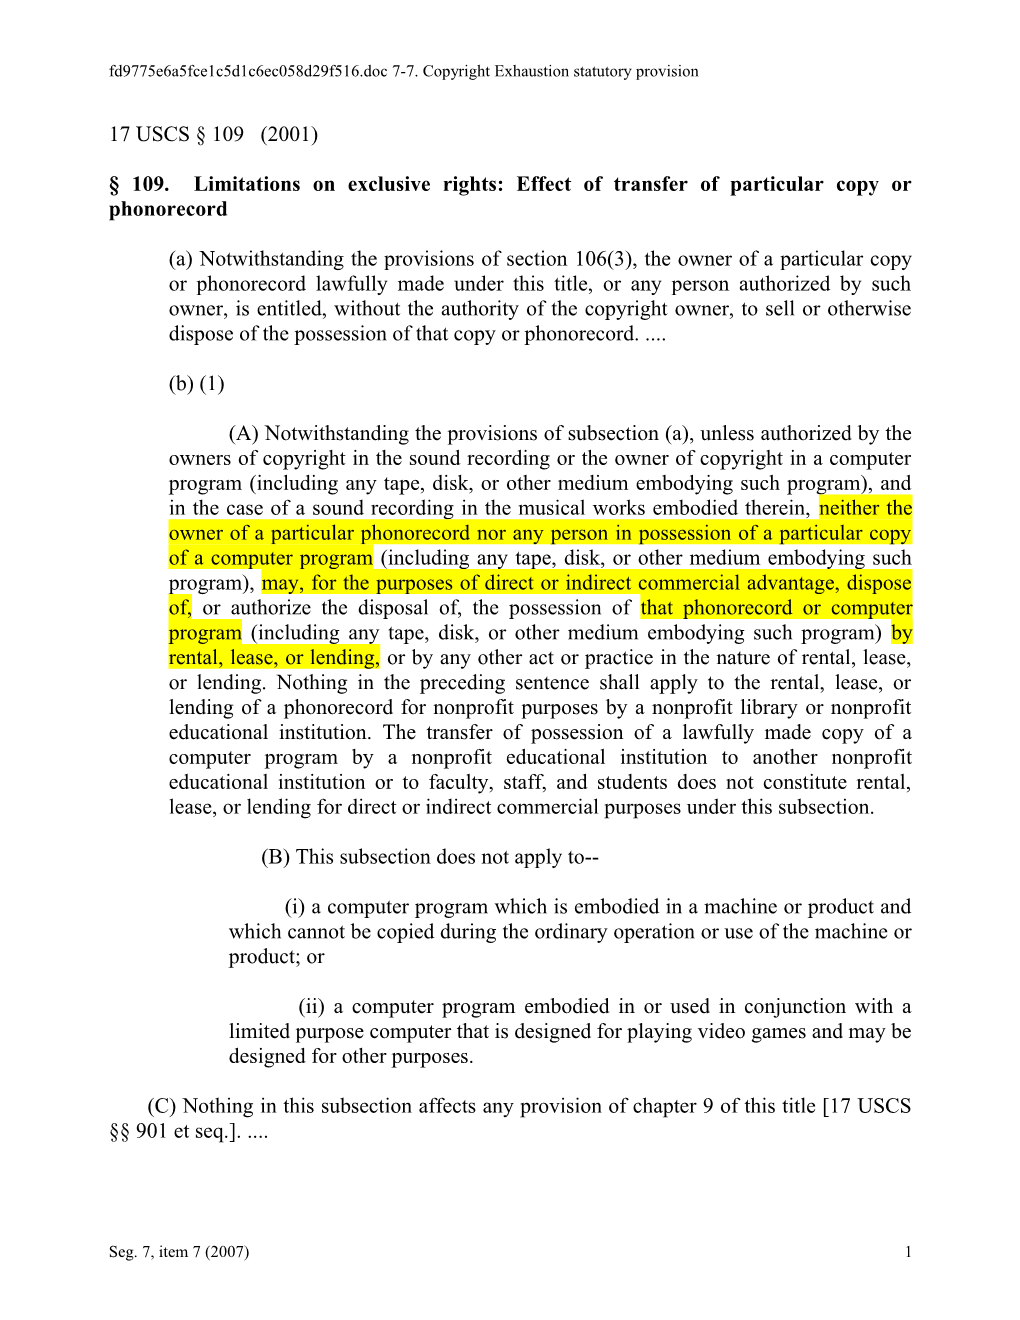 109. Limitations on Exclusive Rights: Effect of Transfer of Particular Copy Or Phonorecord